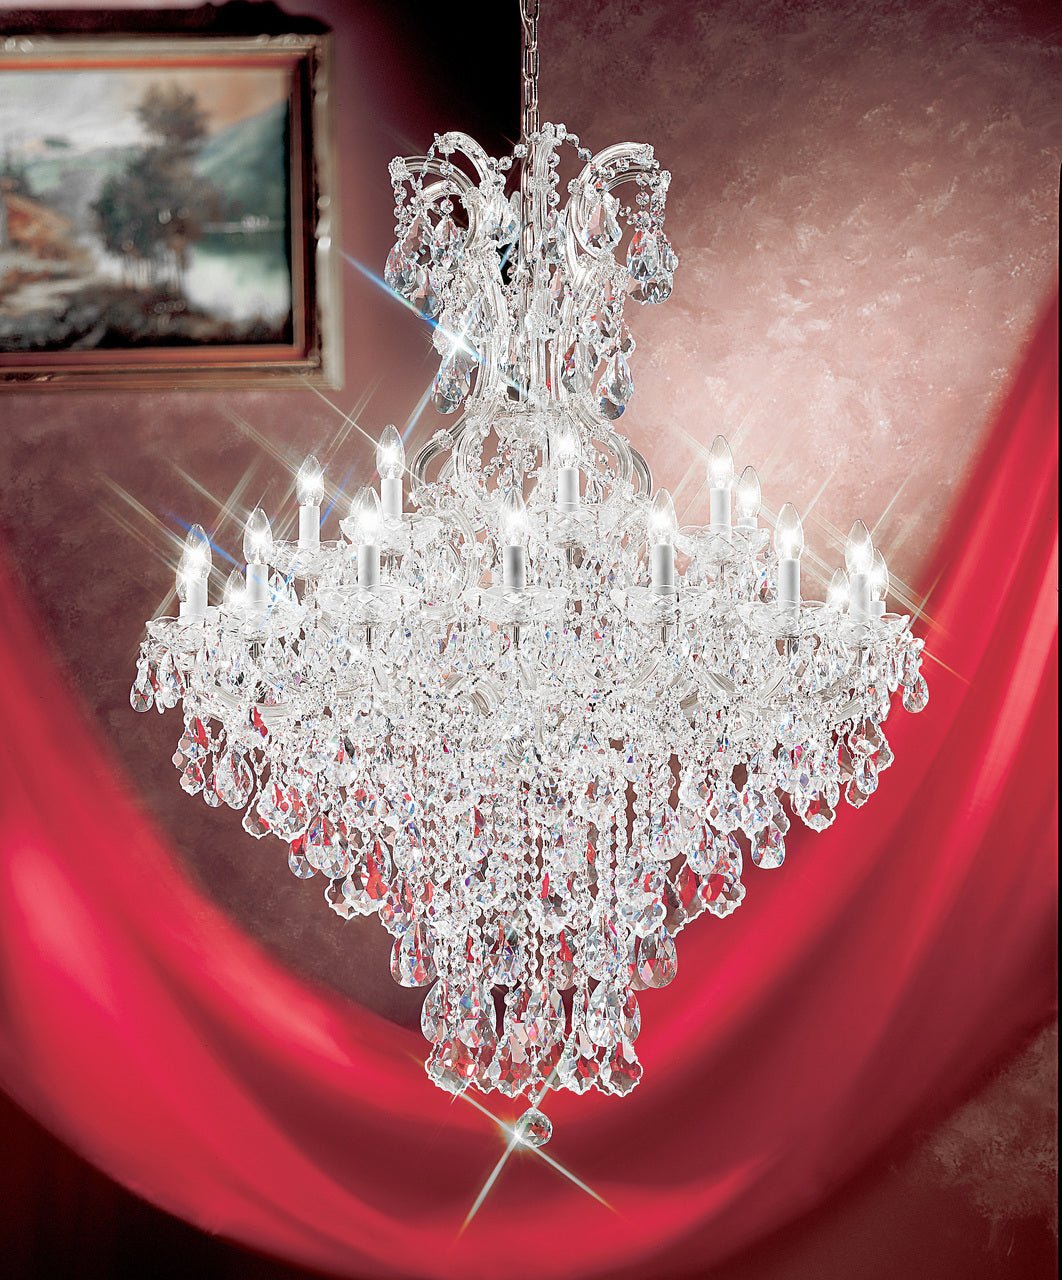 Classic Lighting 8179 CH C Maria Theresa Traditional Crystal Chandelier in Chrome (Imported from Italy)